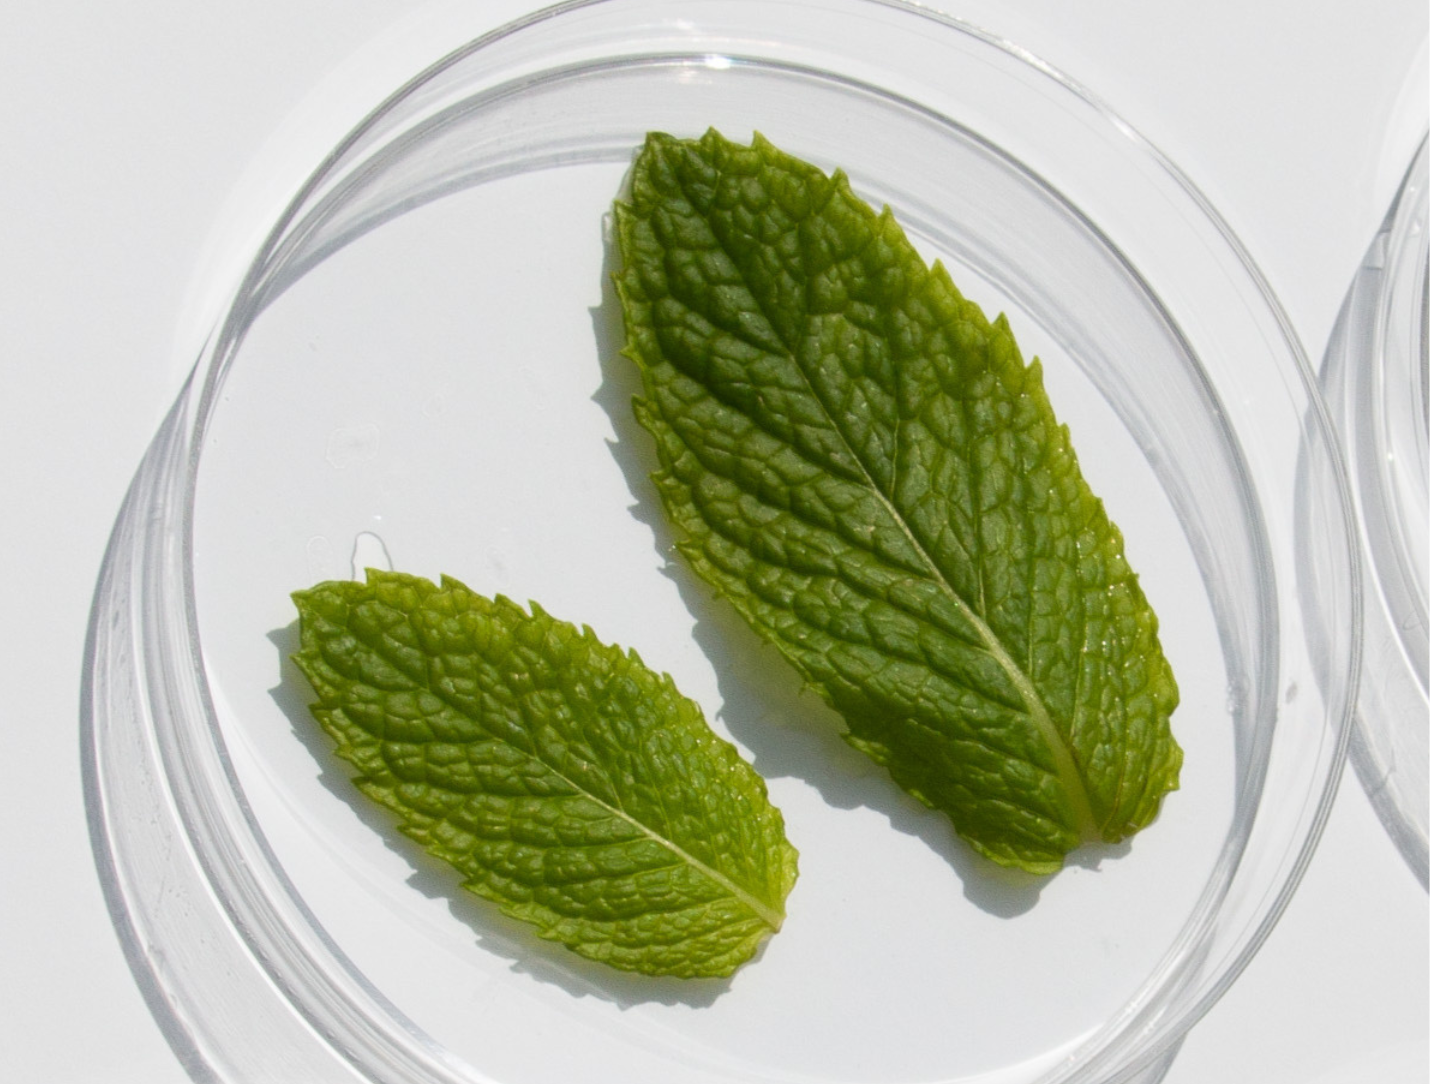 Hair Benefits of Peppermint Oil